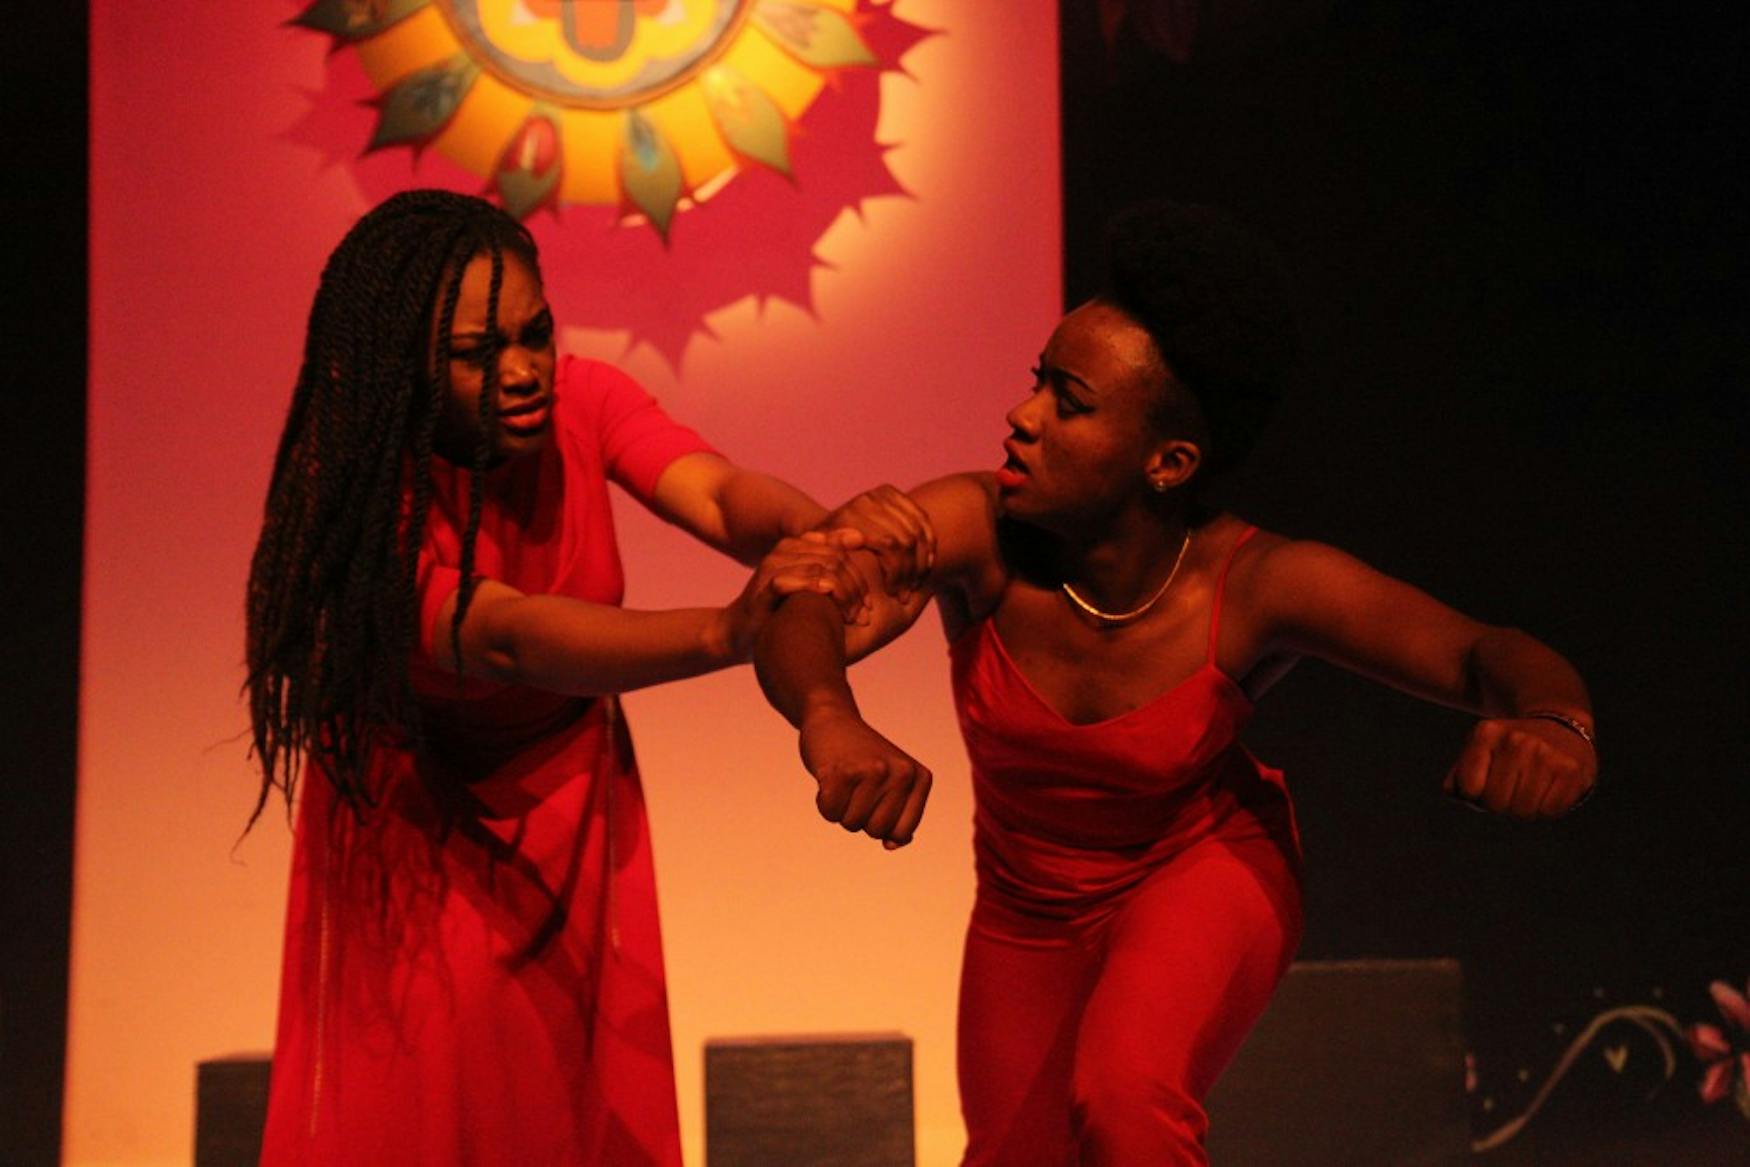 HOME HARDSHIPS: The Ladies in red, Nyah Macklin ’15 (on the right) and Oye Ehikhamhen ’17 (on the left) engage in a domestic struggle.